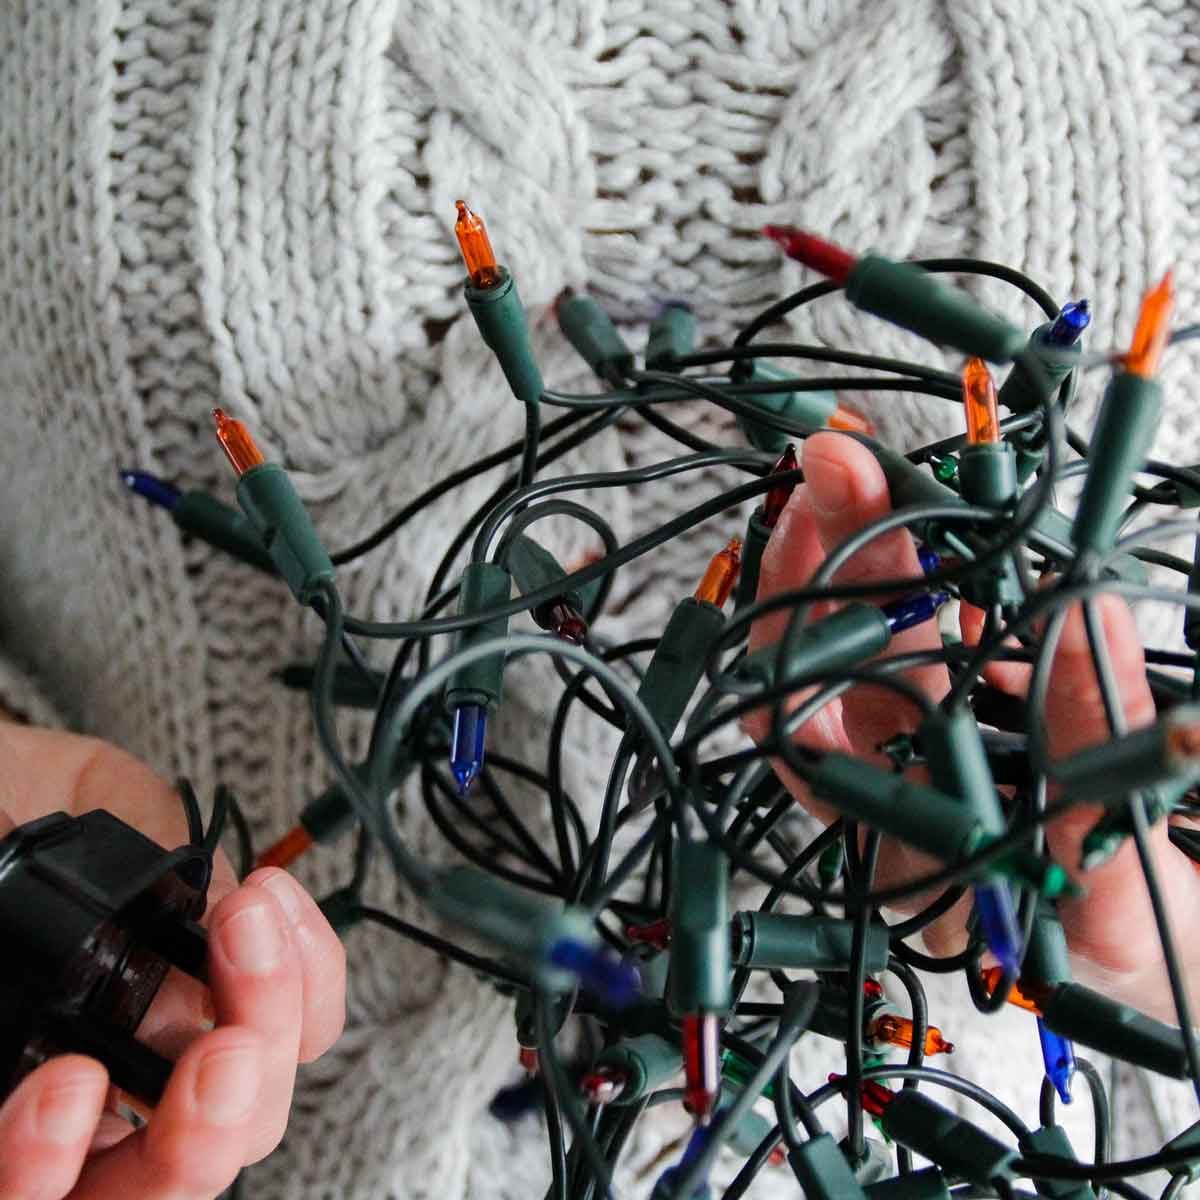 How to Test, Fix and Change Christmas Lights (DIY)